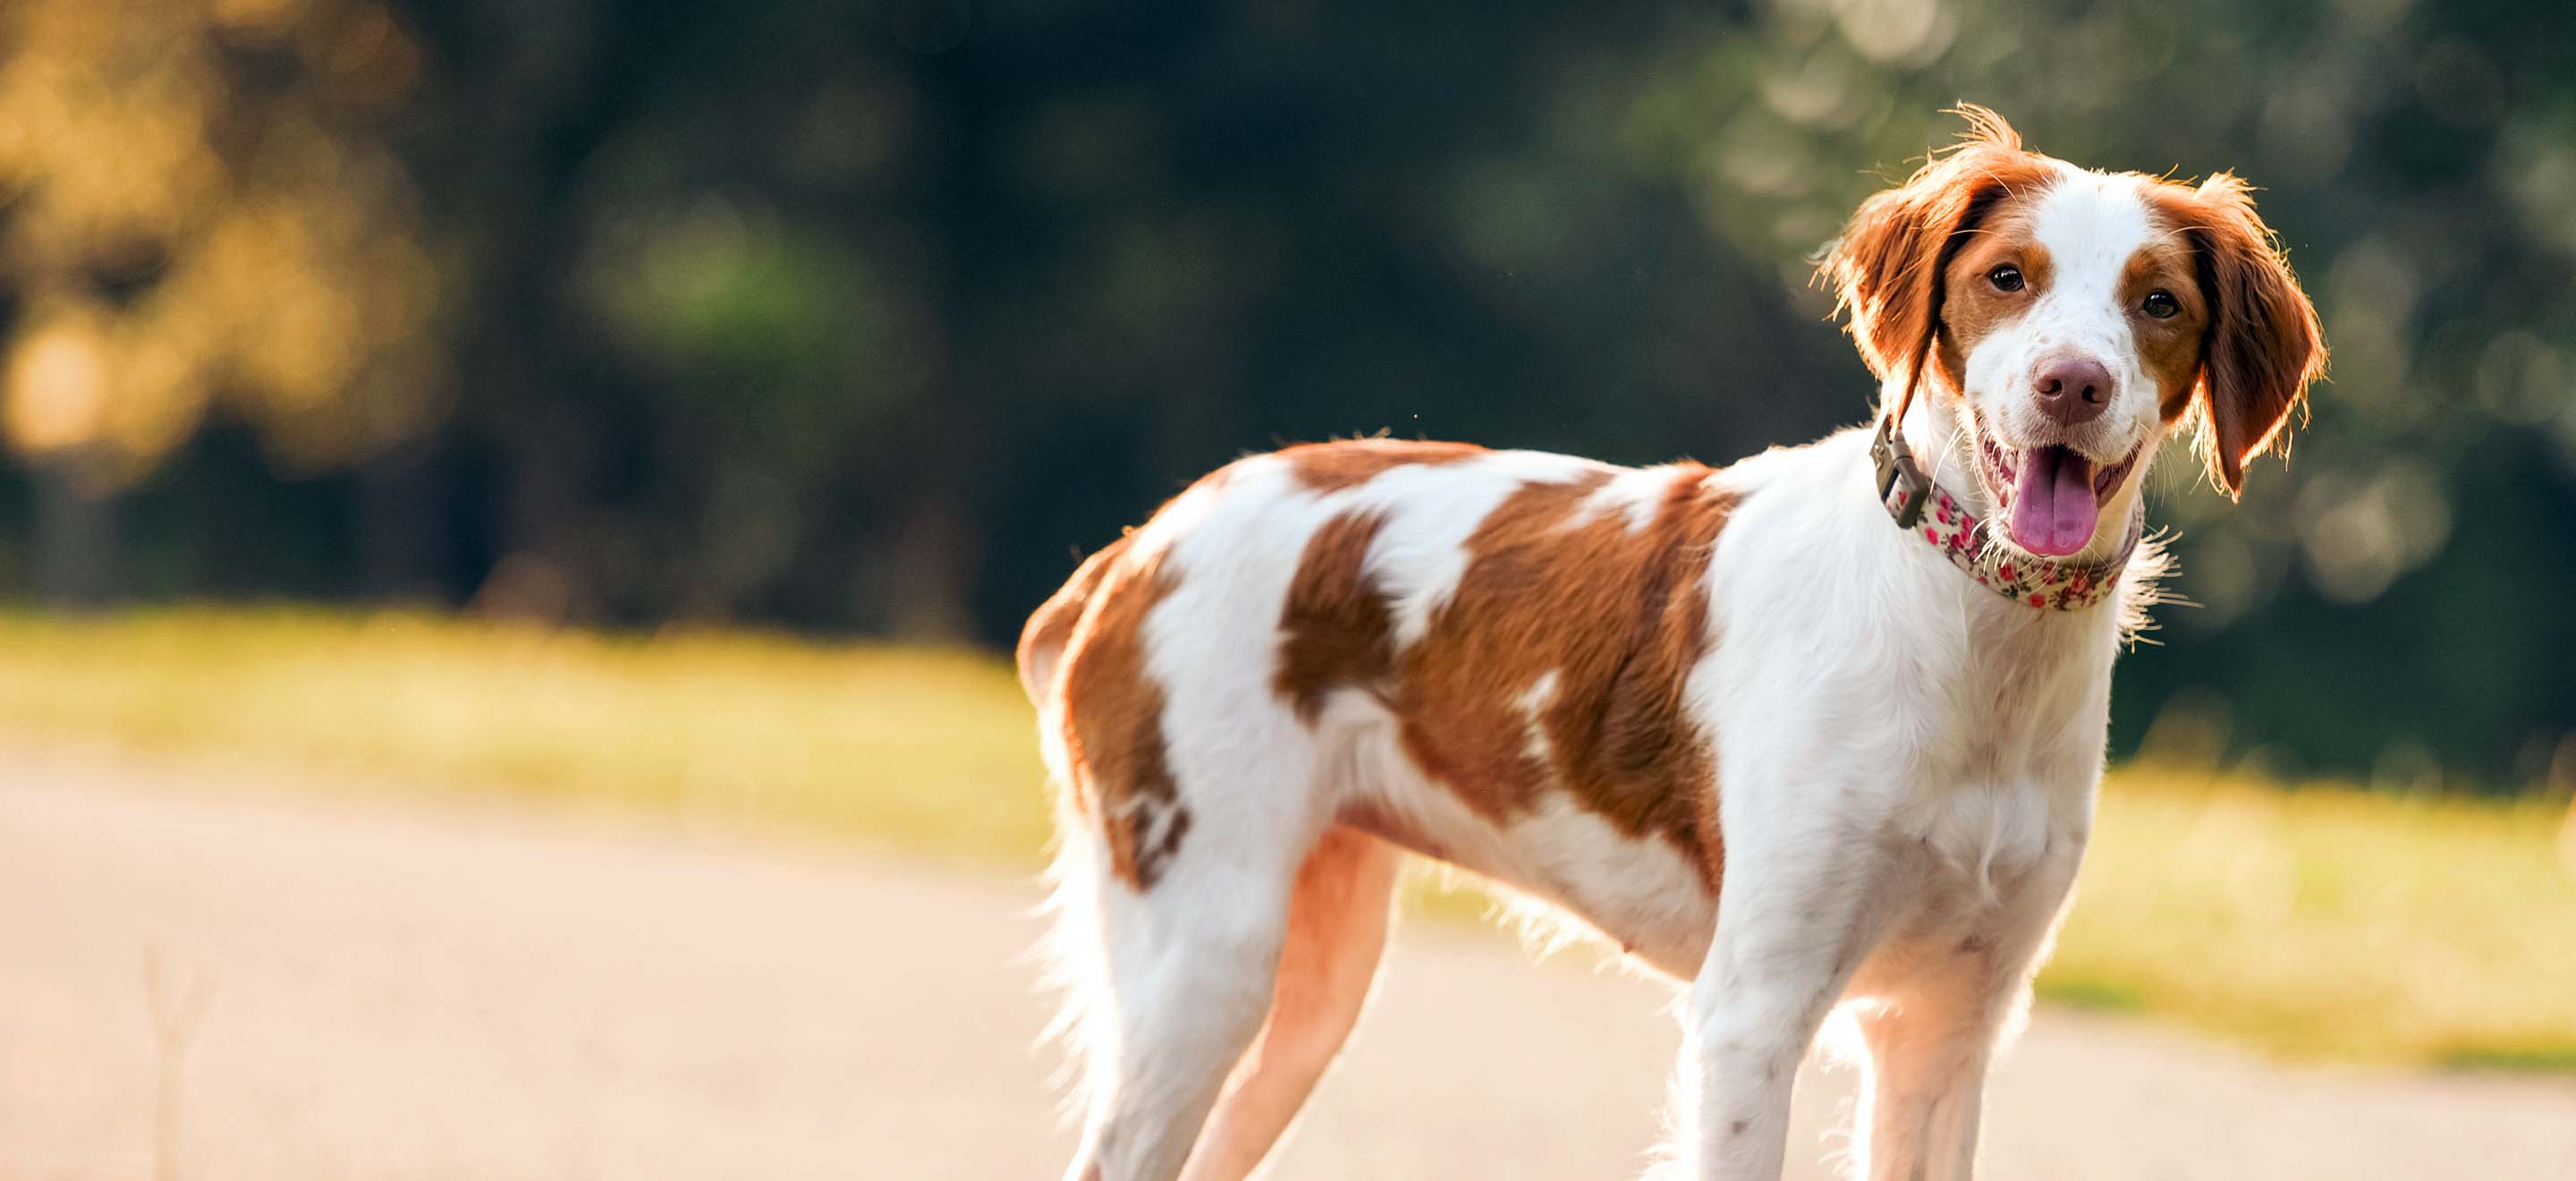 A Brittany dog standing on a walking path at the park image